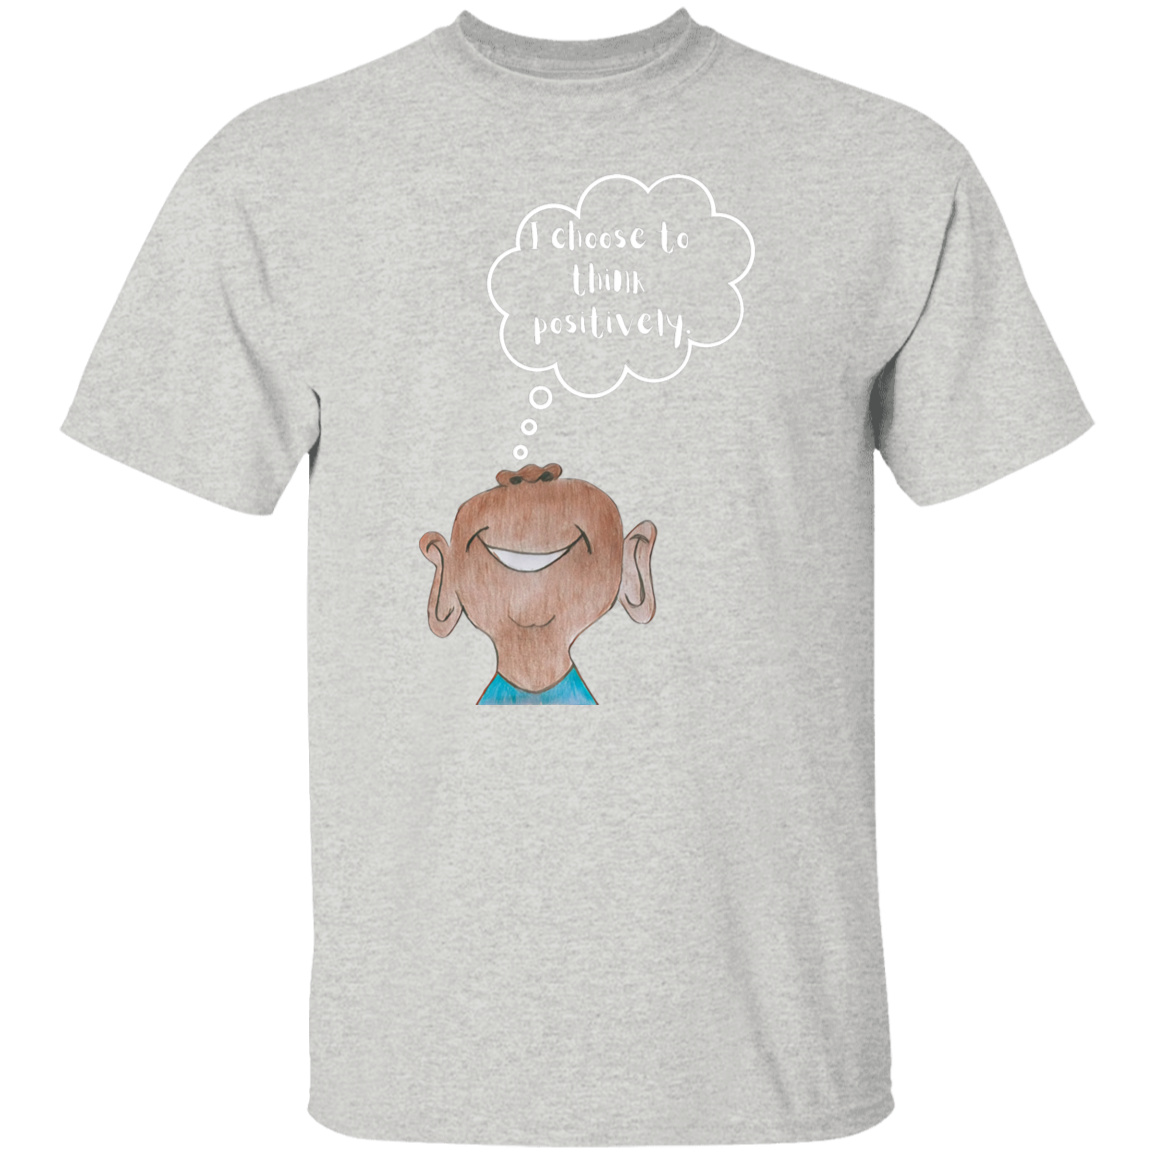 I choose to think positively. Youth 5.3 oz 100% Cotton T-Shirt